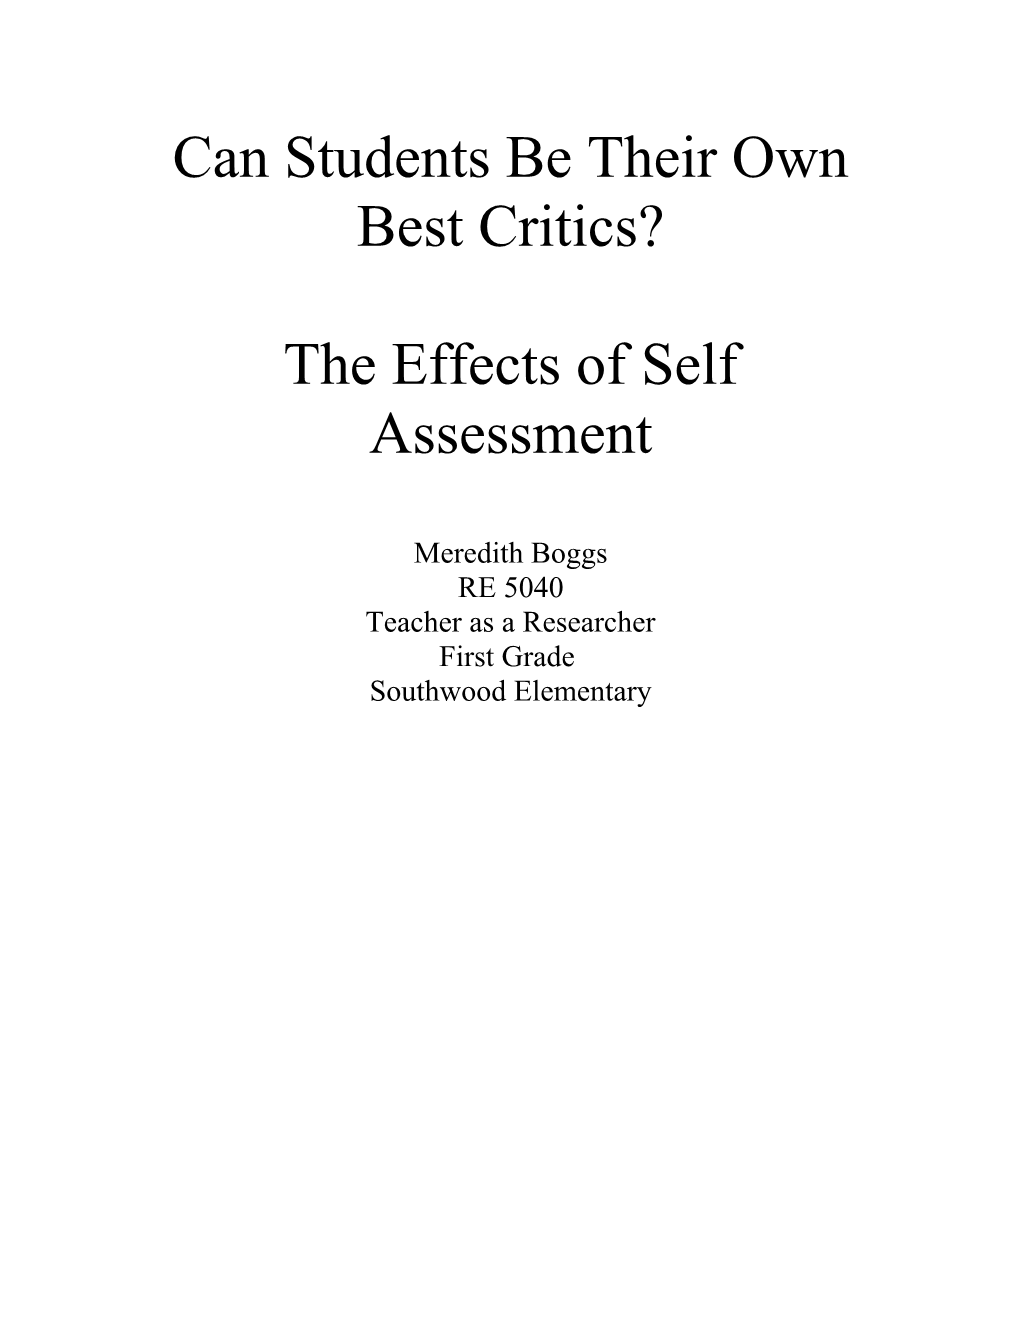 Can Students Be Their Own Best Critics